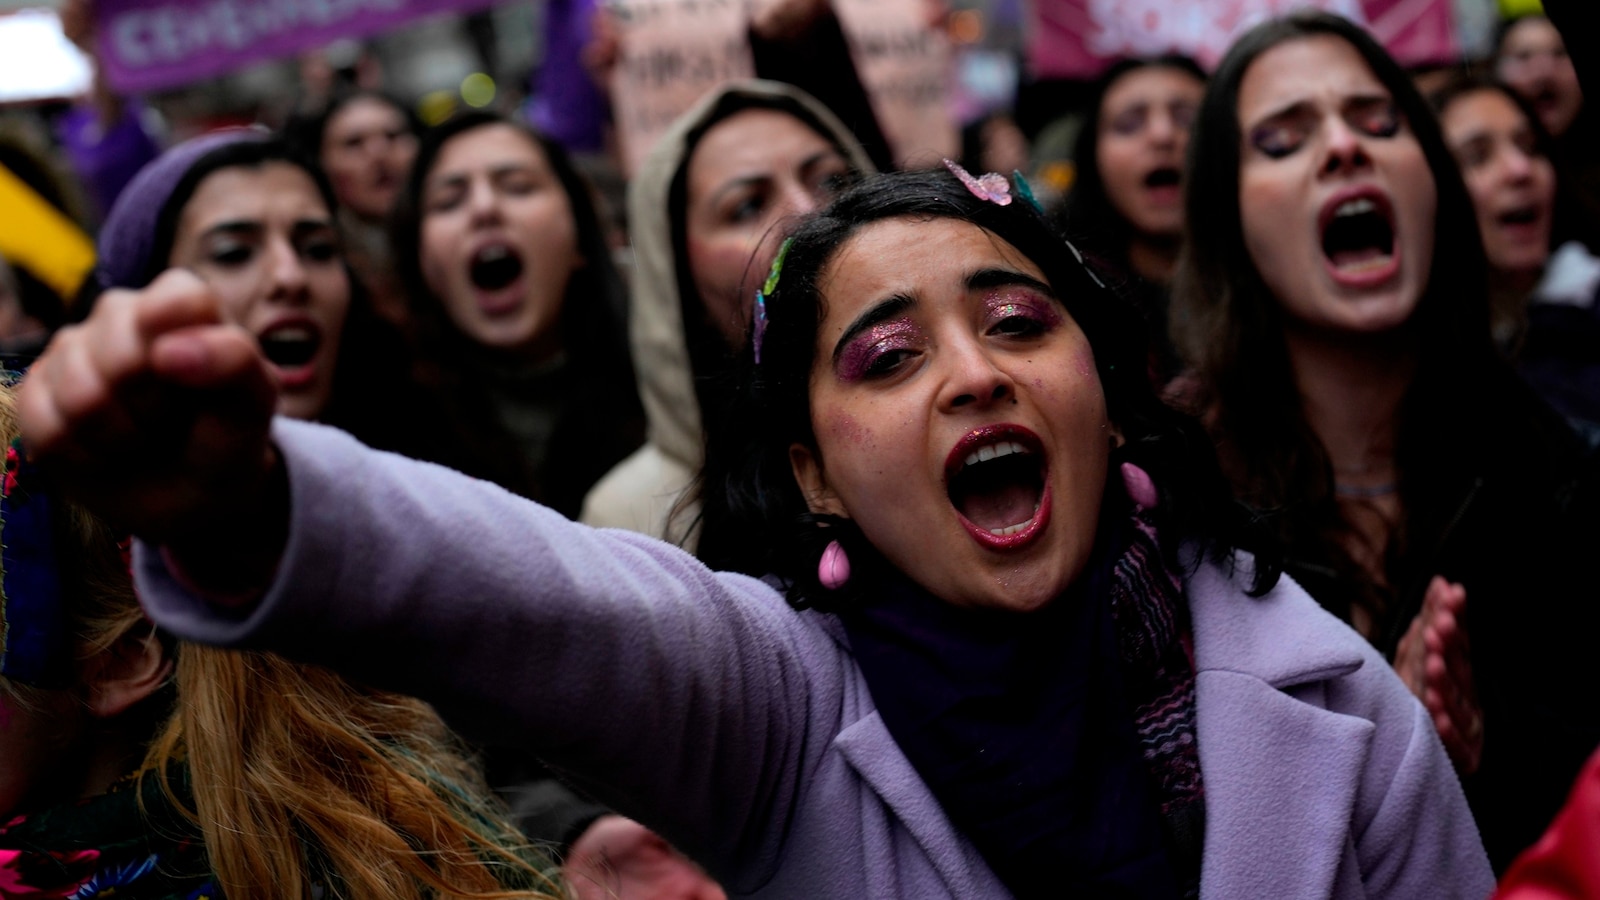 Thousands of Turkish women defy ban to protest for equal rights